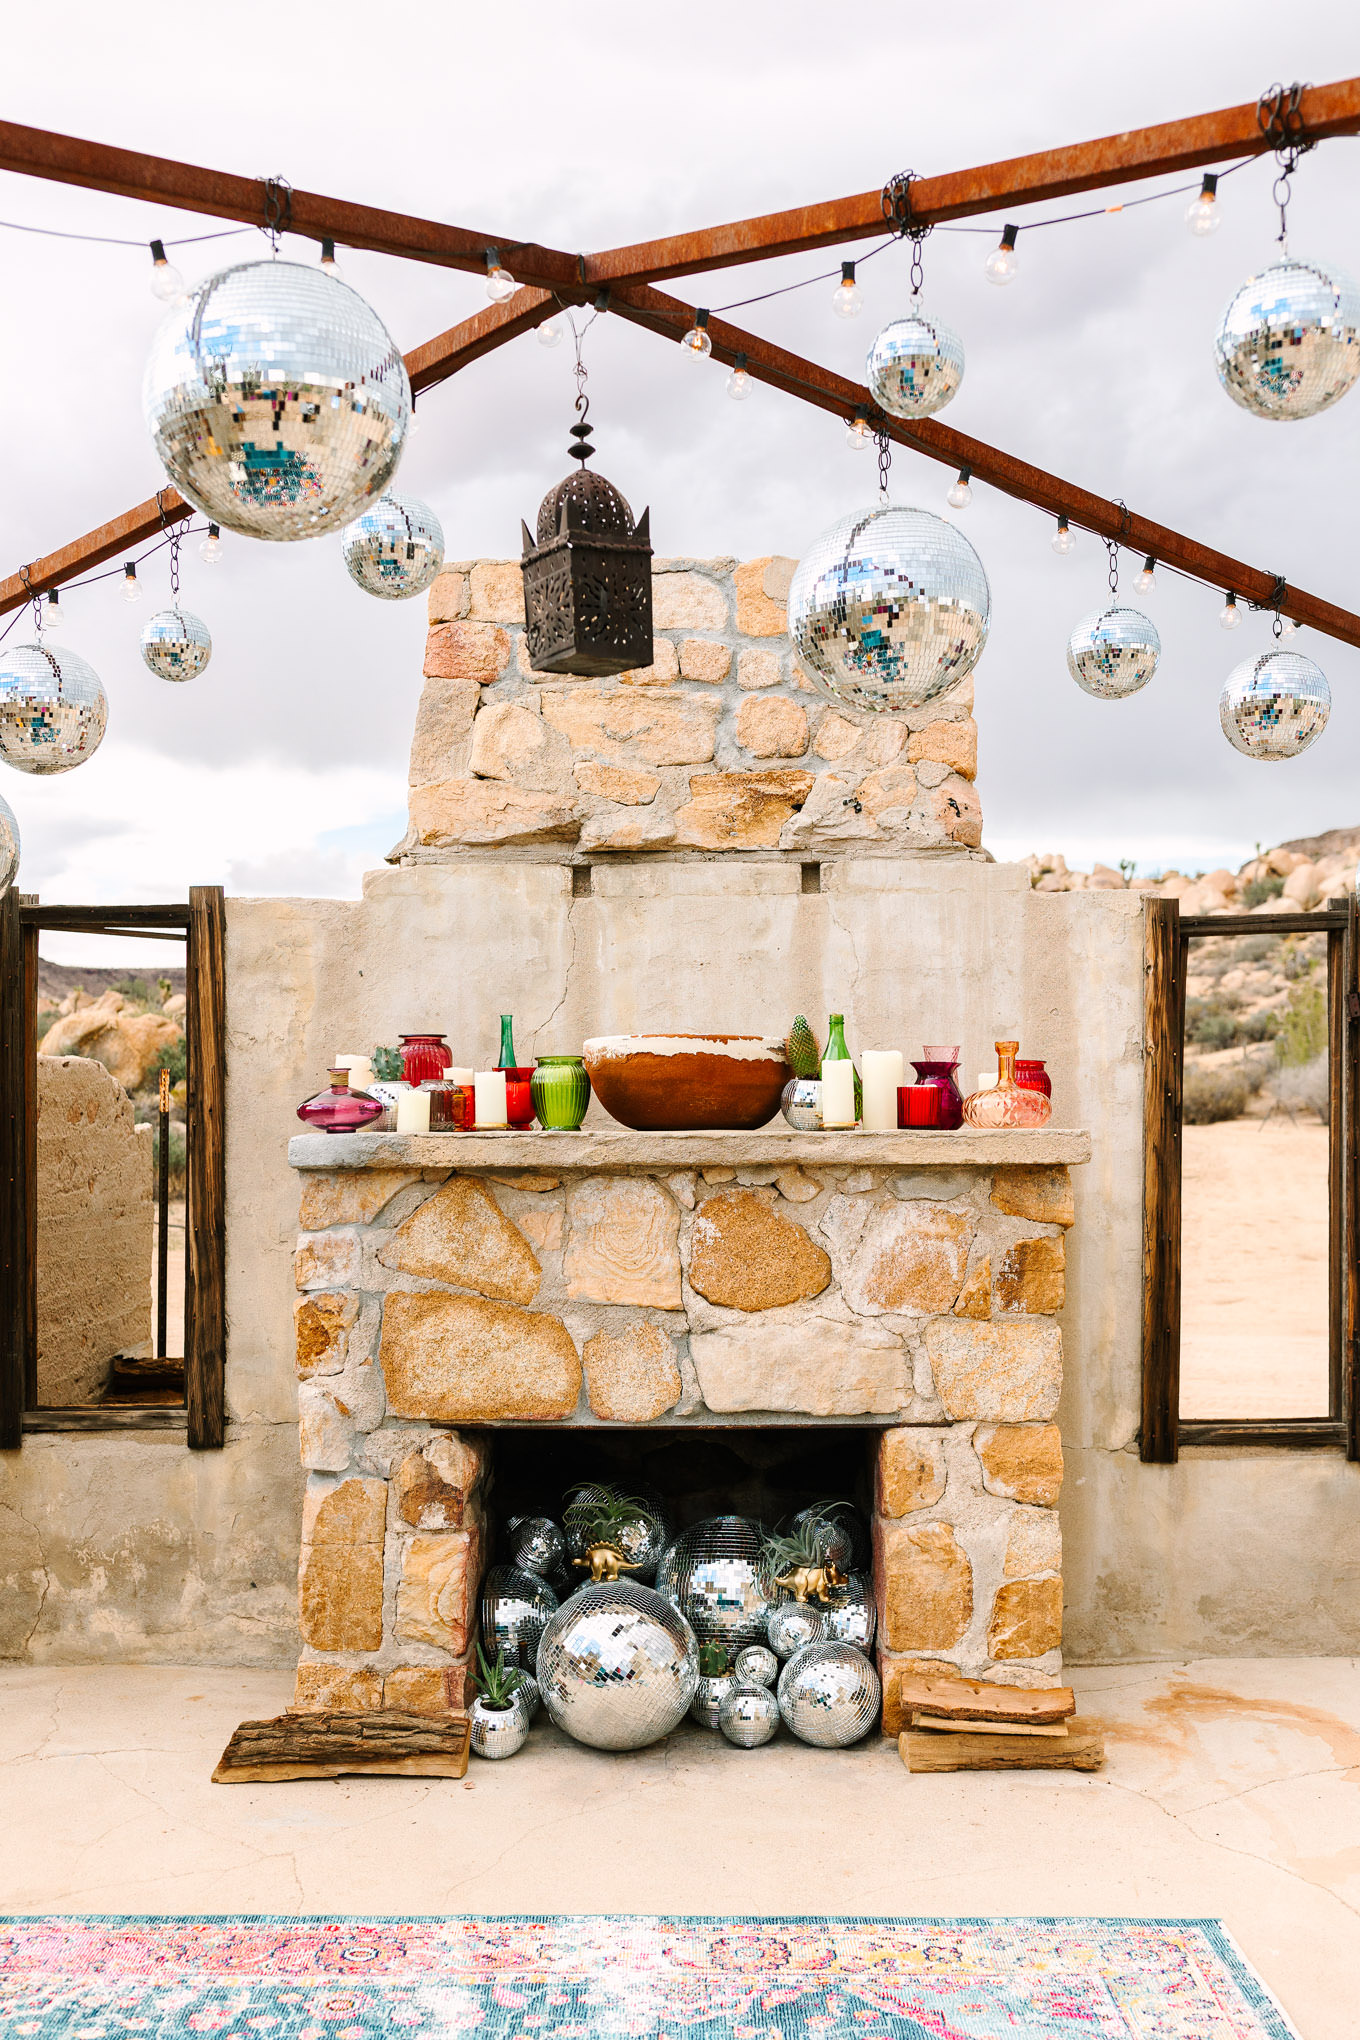 Joshua Tree wedding at The Ruin Venue | Wedding and elopement photography roundup | Los Angeles and Palm Springs photographer | #losangeleswedding #palmspringswedding #elopementphotographer Source: Mary Costa Photography | Los Angeles